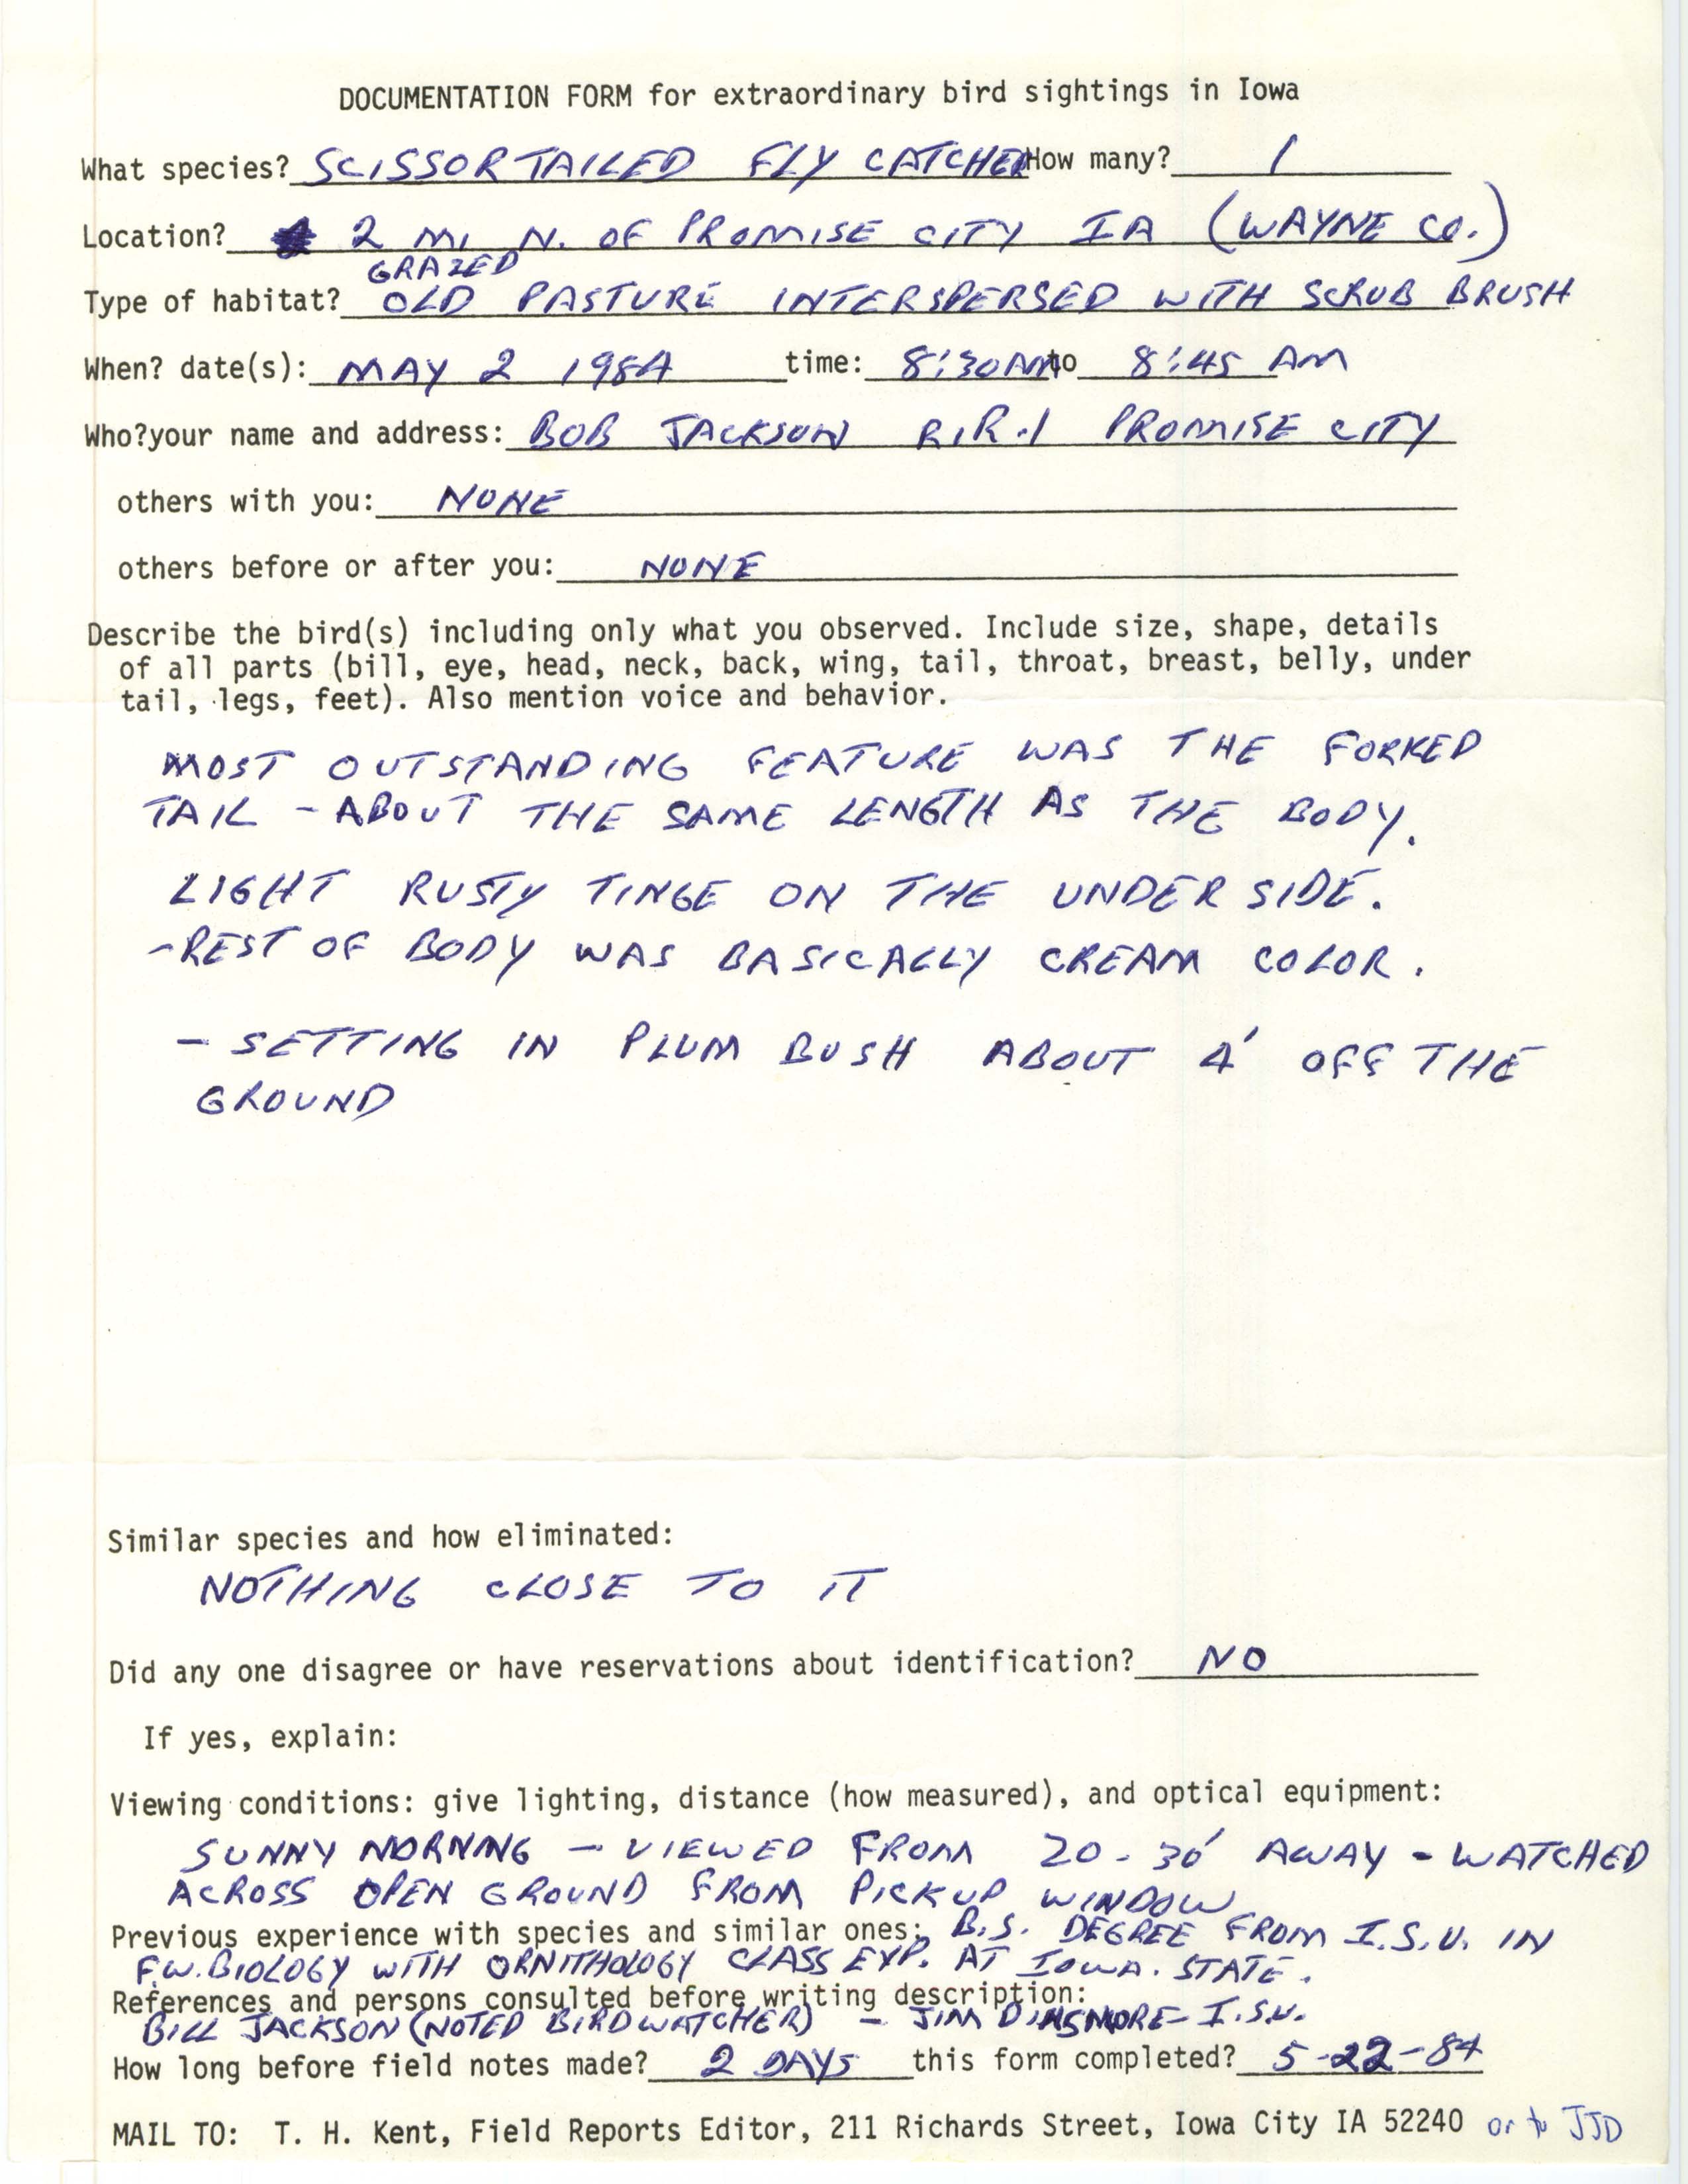 Rare bird documentation form for Scissor-tailed Flycatcher north of Promise City, 1984